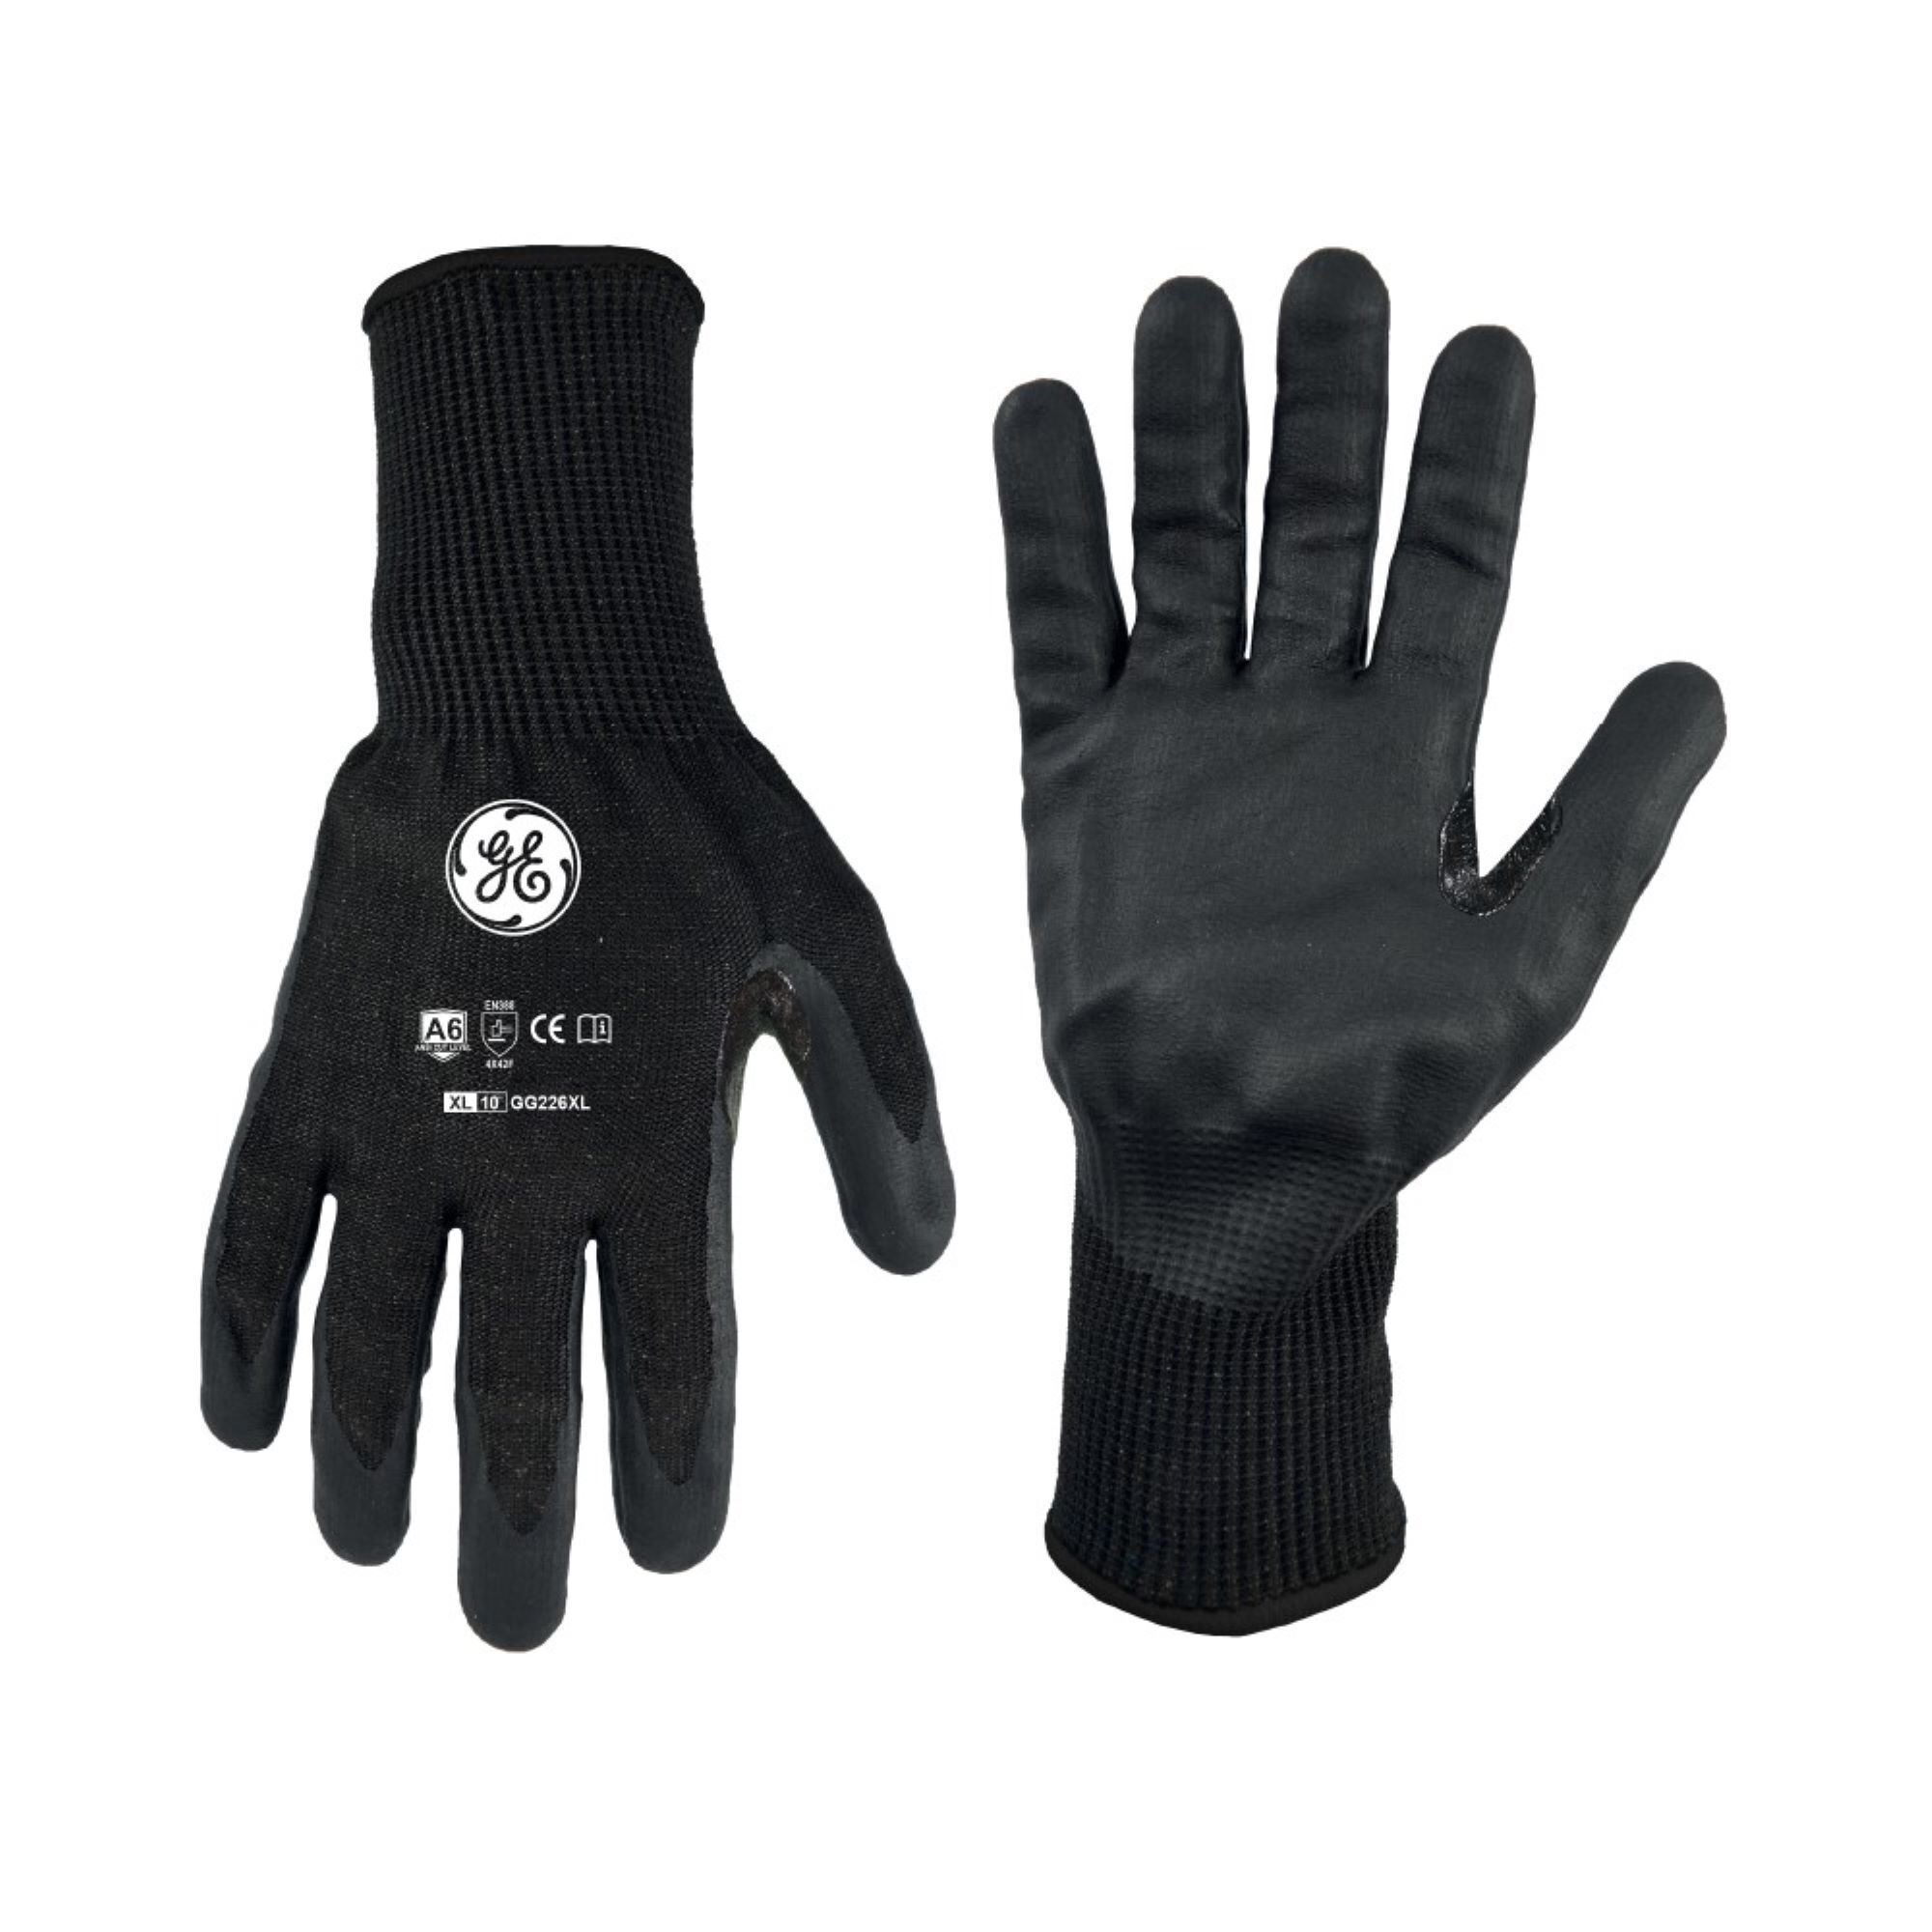 General Electric, XL Foam Nitrile Black Dipped Gloves 12 pair, Size XL, Included (qty.) 12, Model GG226XL